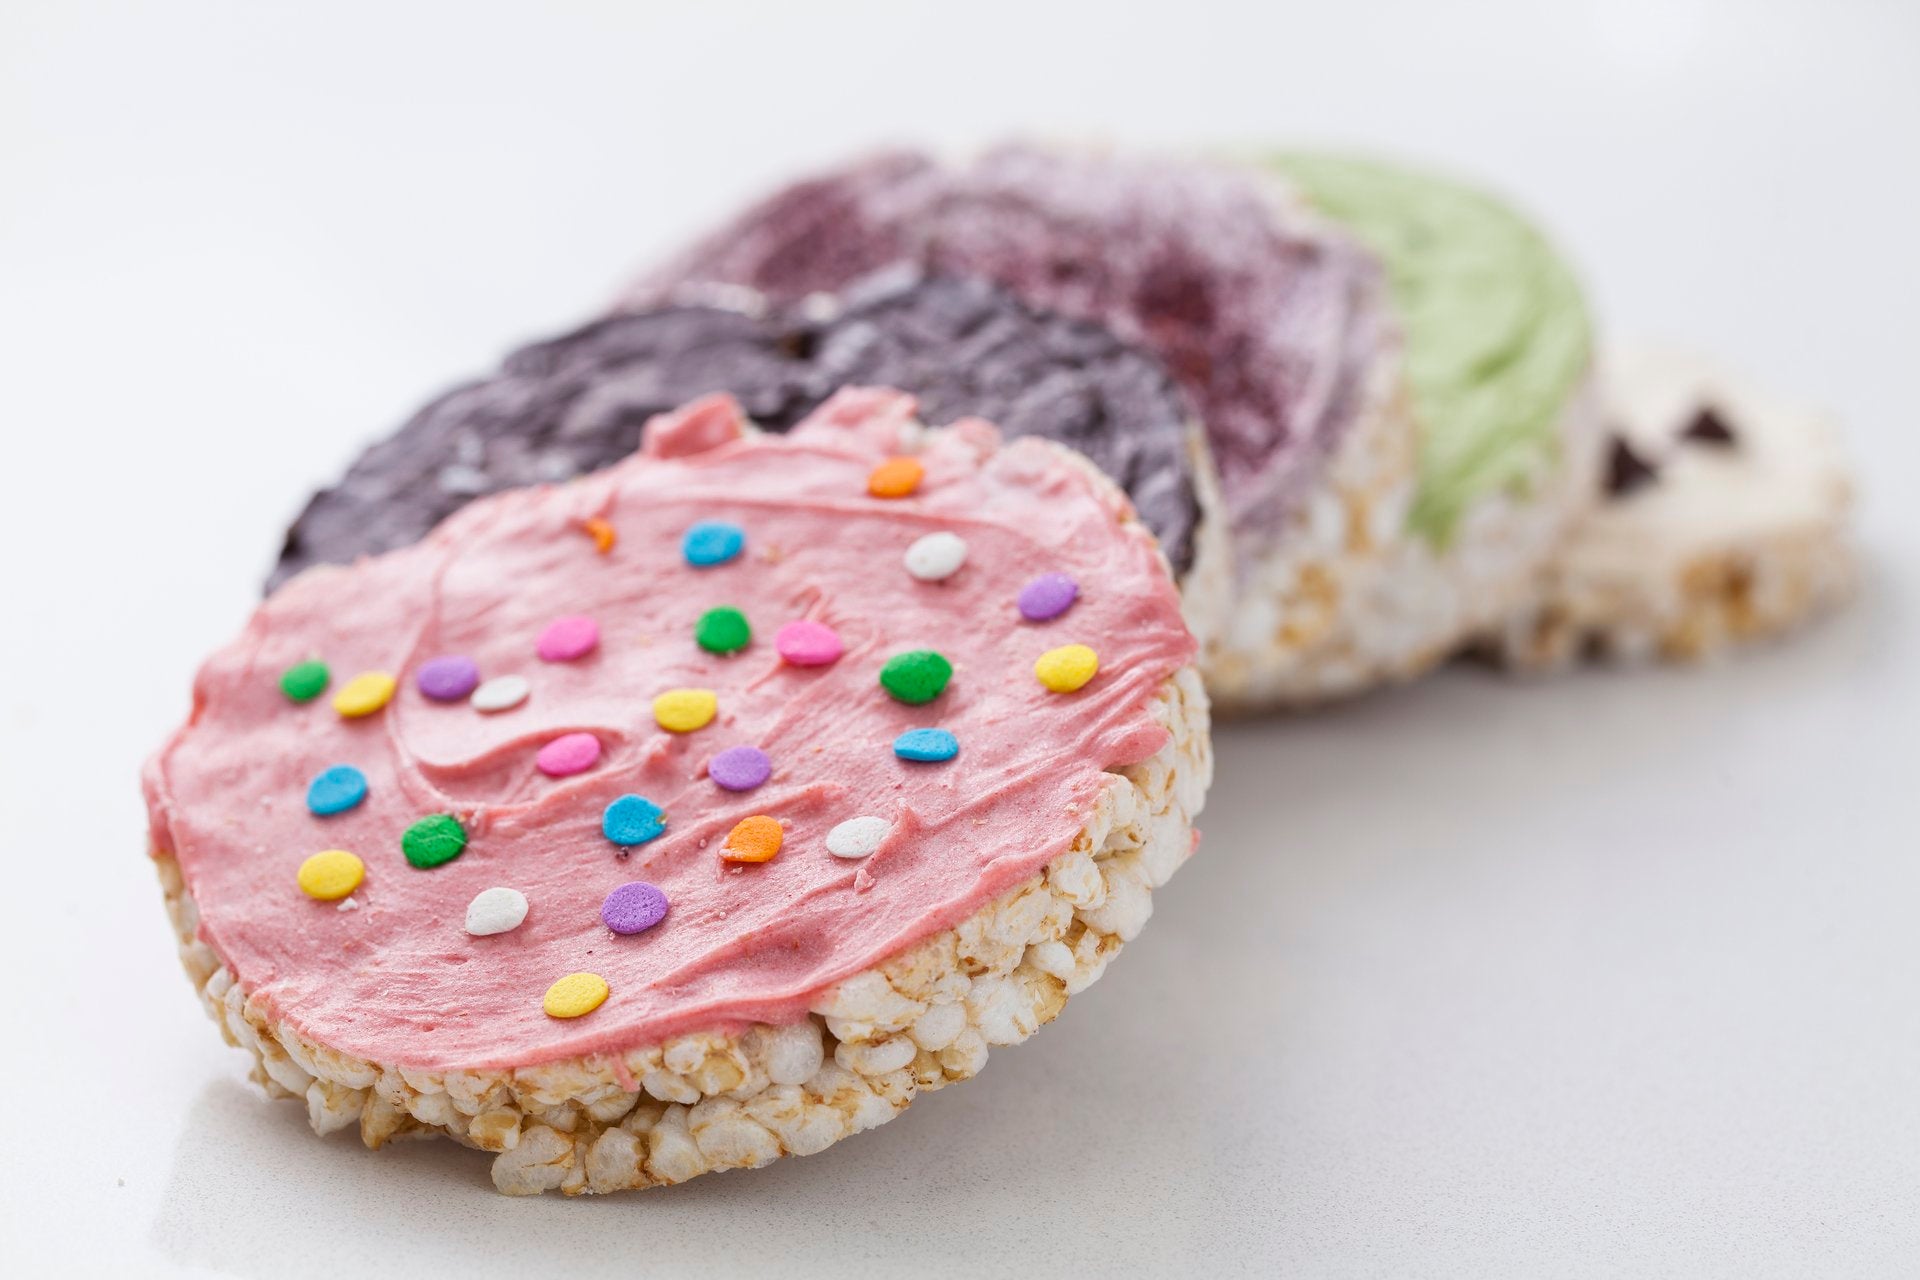 RICE CAKES TOPPED WITH CUPCAKE AND COOKIE FLAVORS